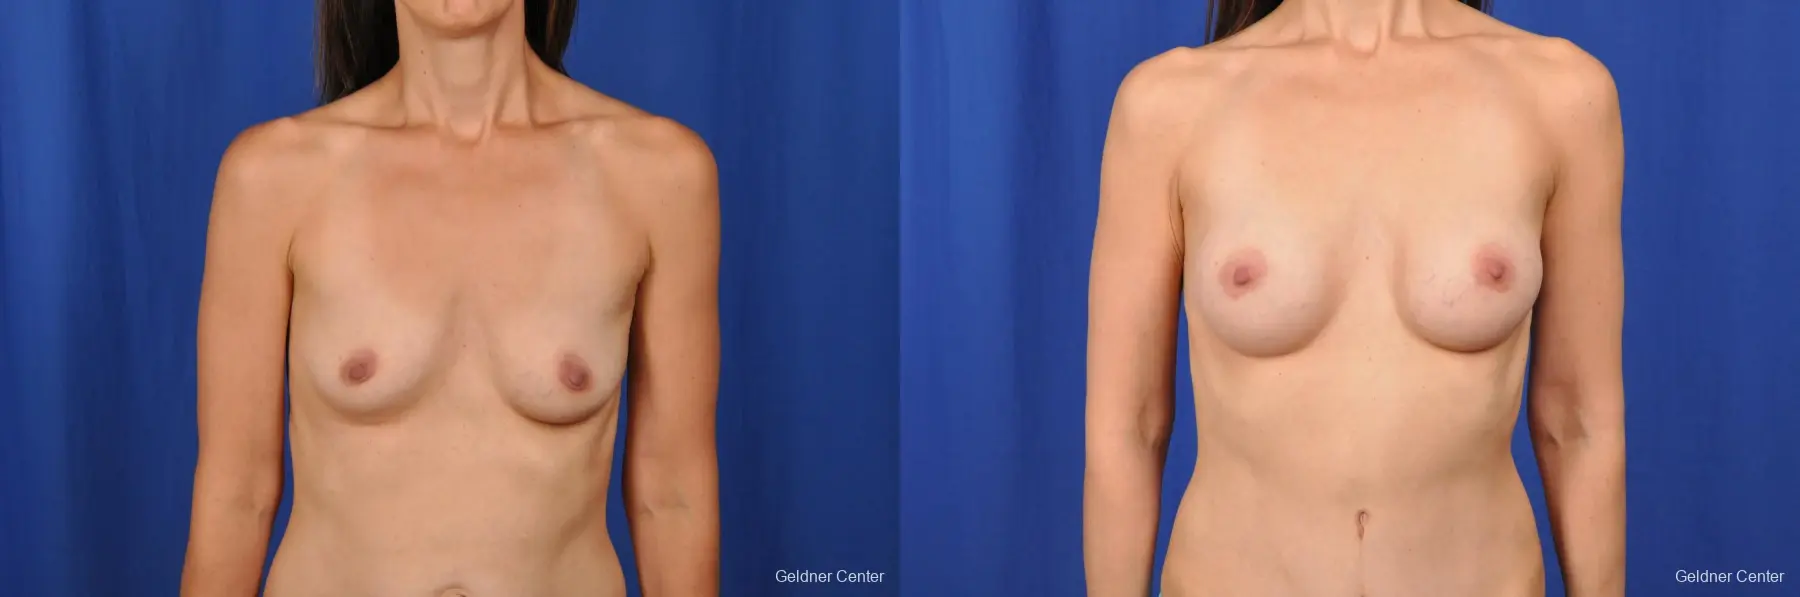 Chicago Breast Augmentation 2376 - Before and After 1